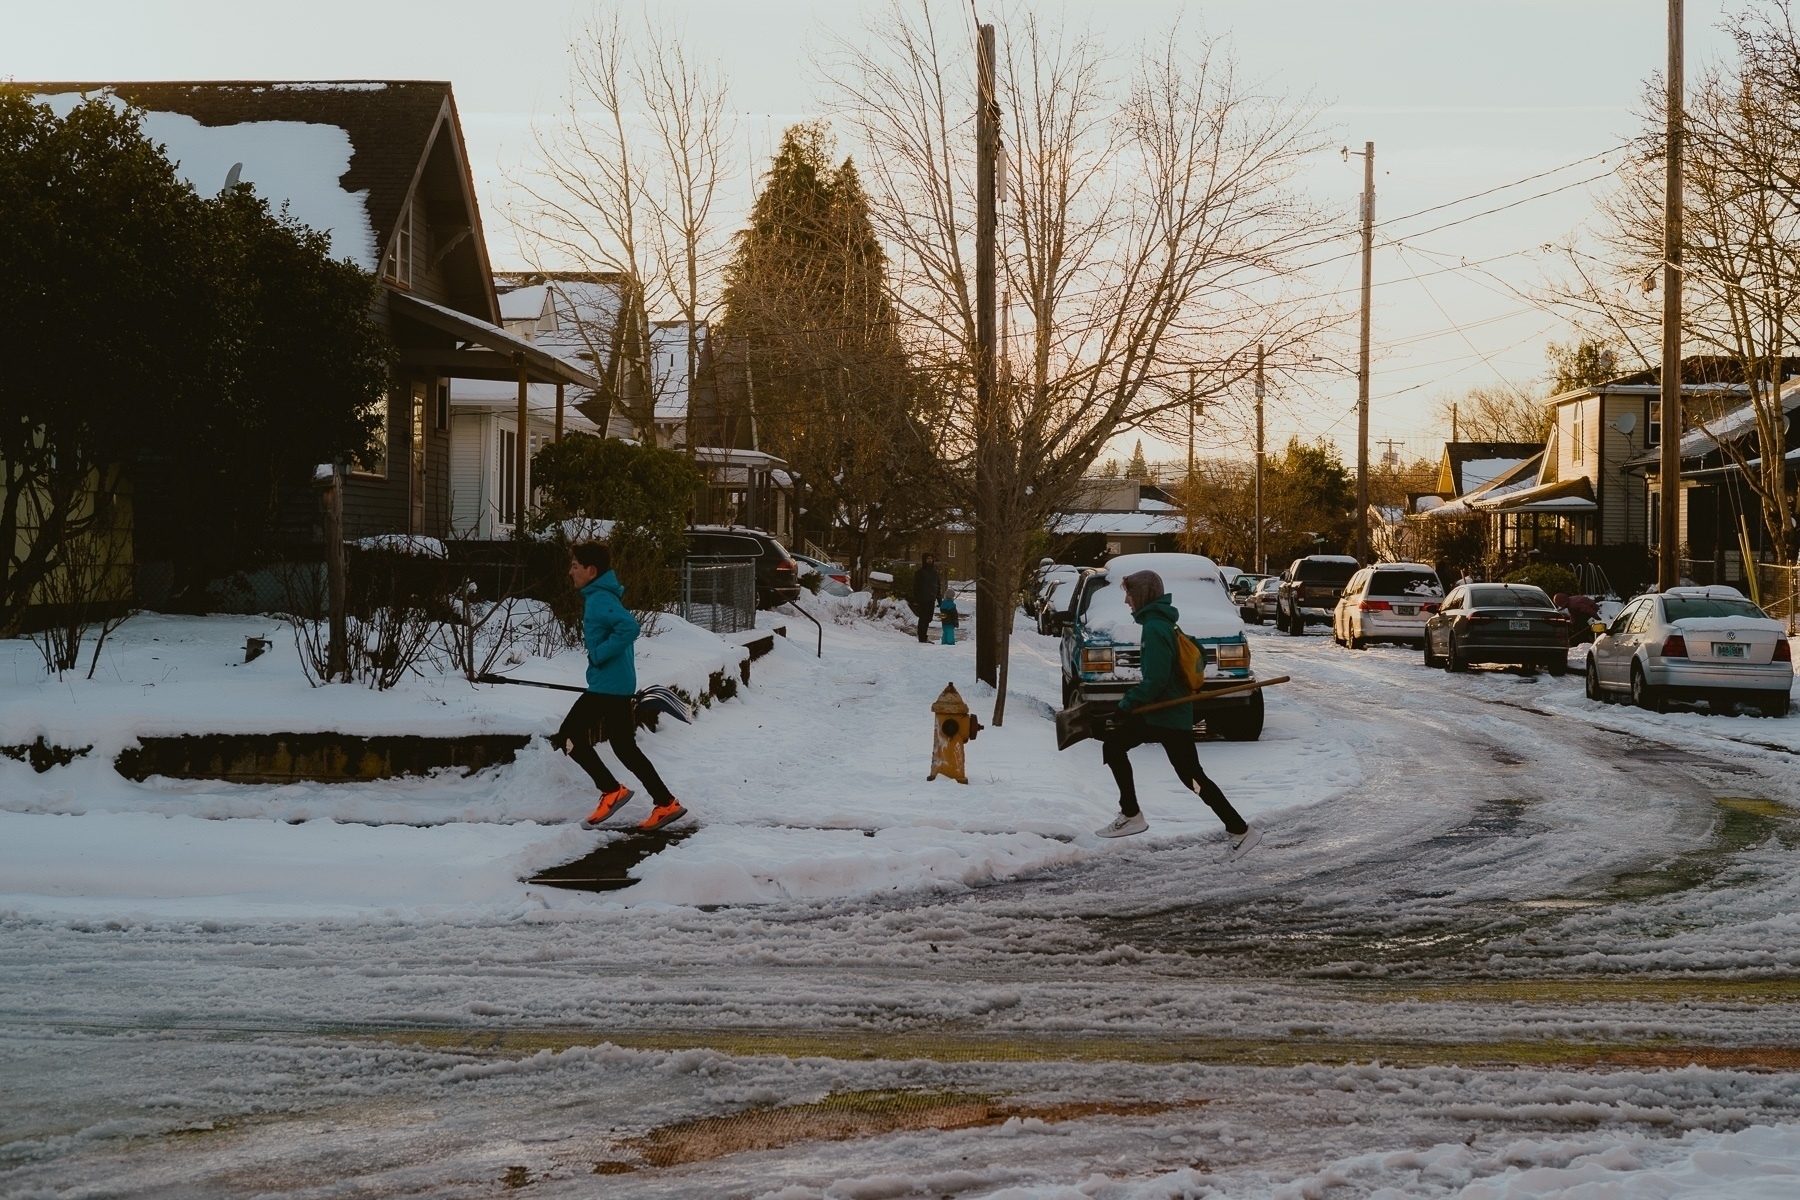 Two teenagers run across the snow packed street and sidewalks with shovels in their hands. Behind them are houses and the sky is lit by the sunset.